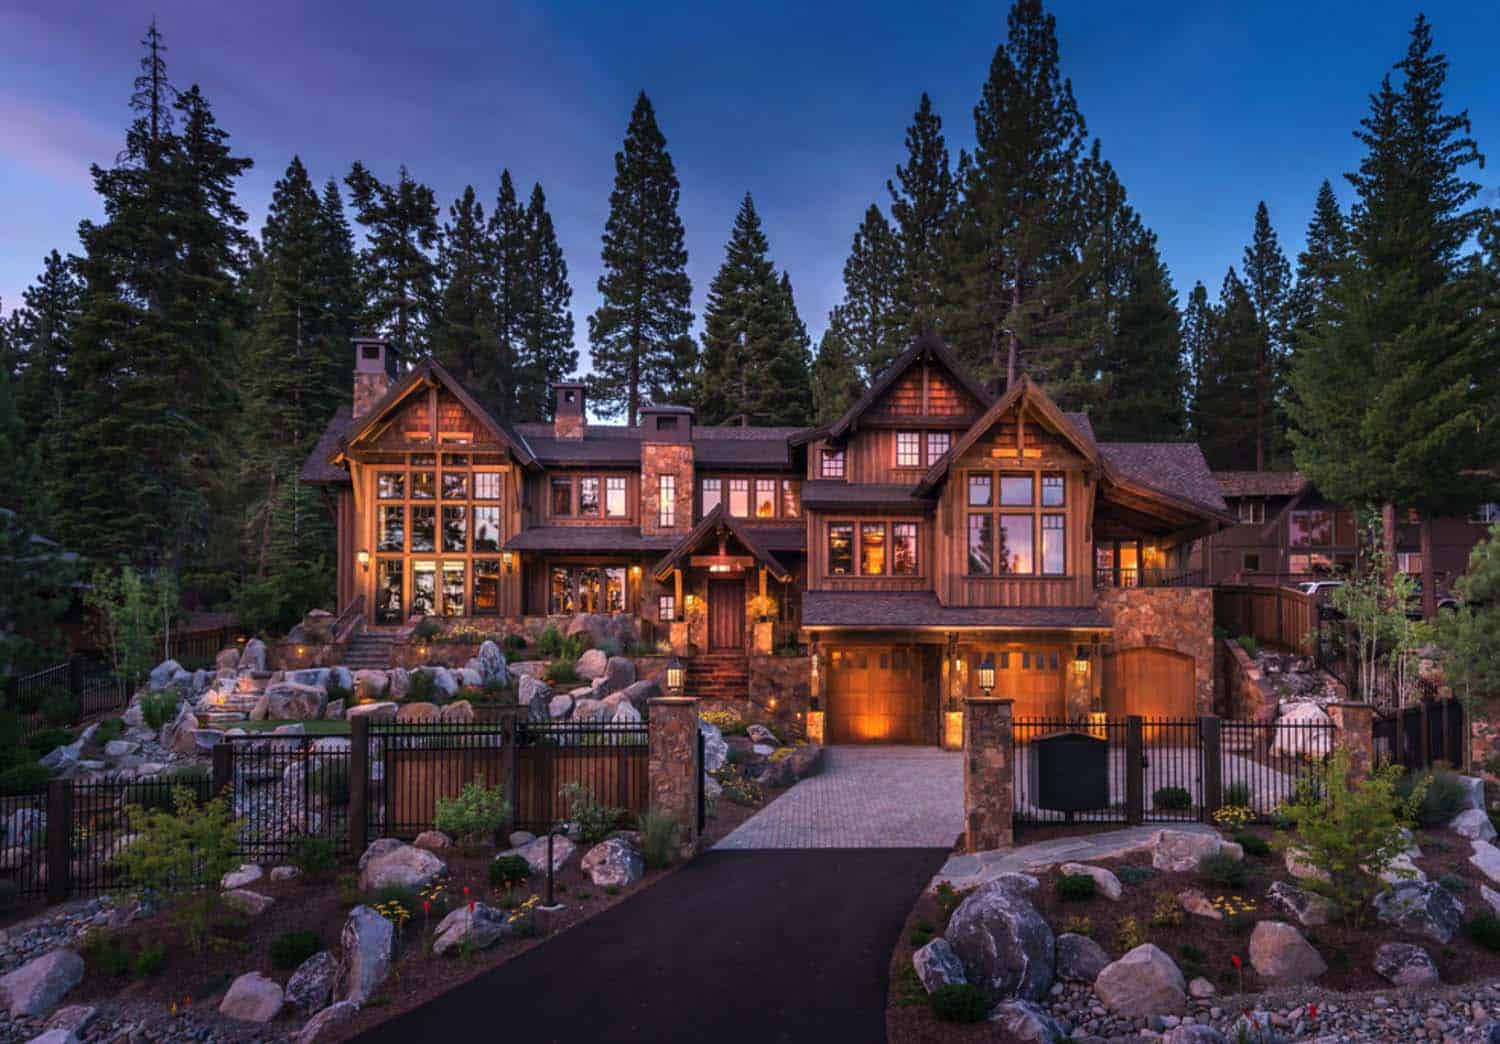 Exquisitely designed rustic lakeside home in the Nevada mountains